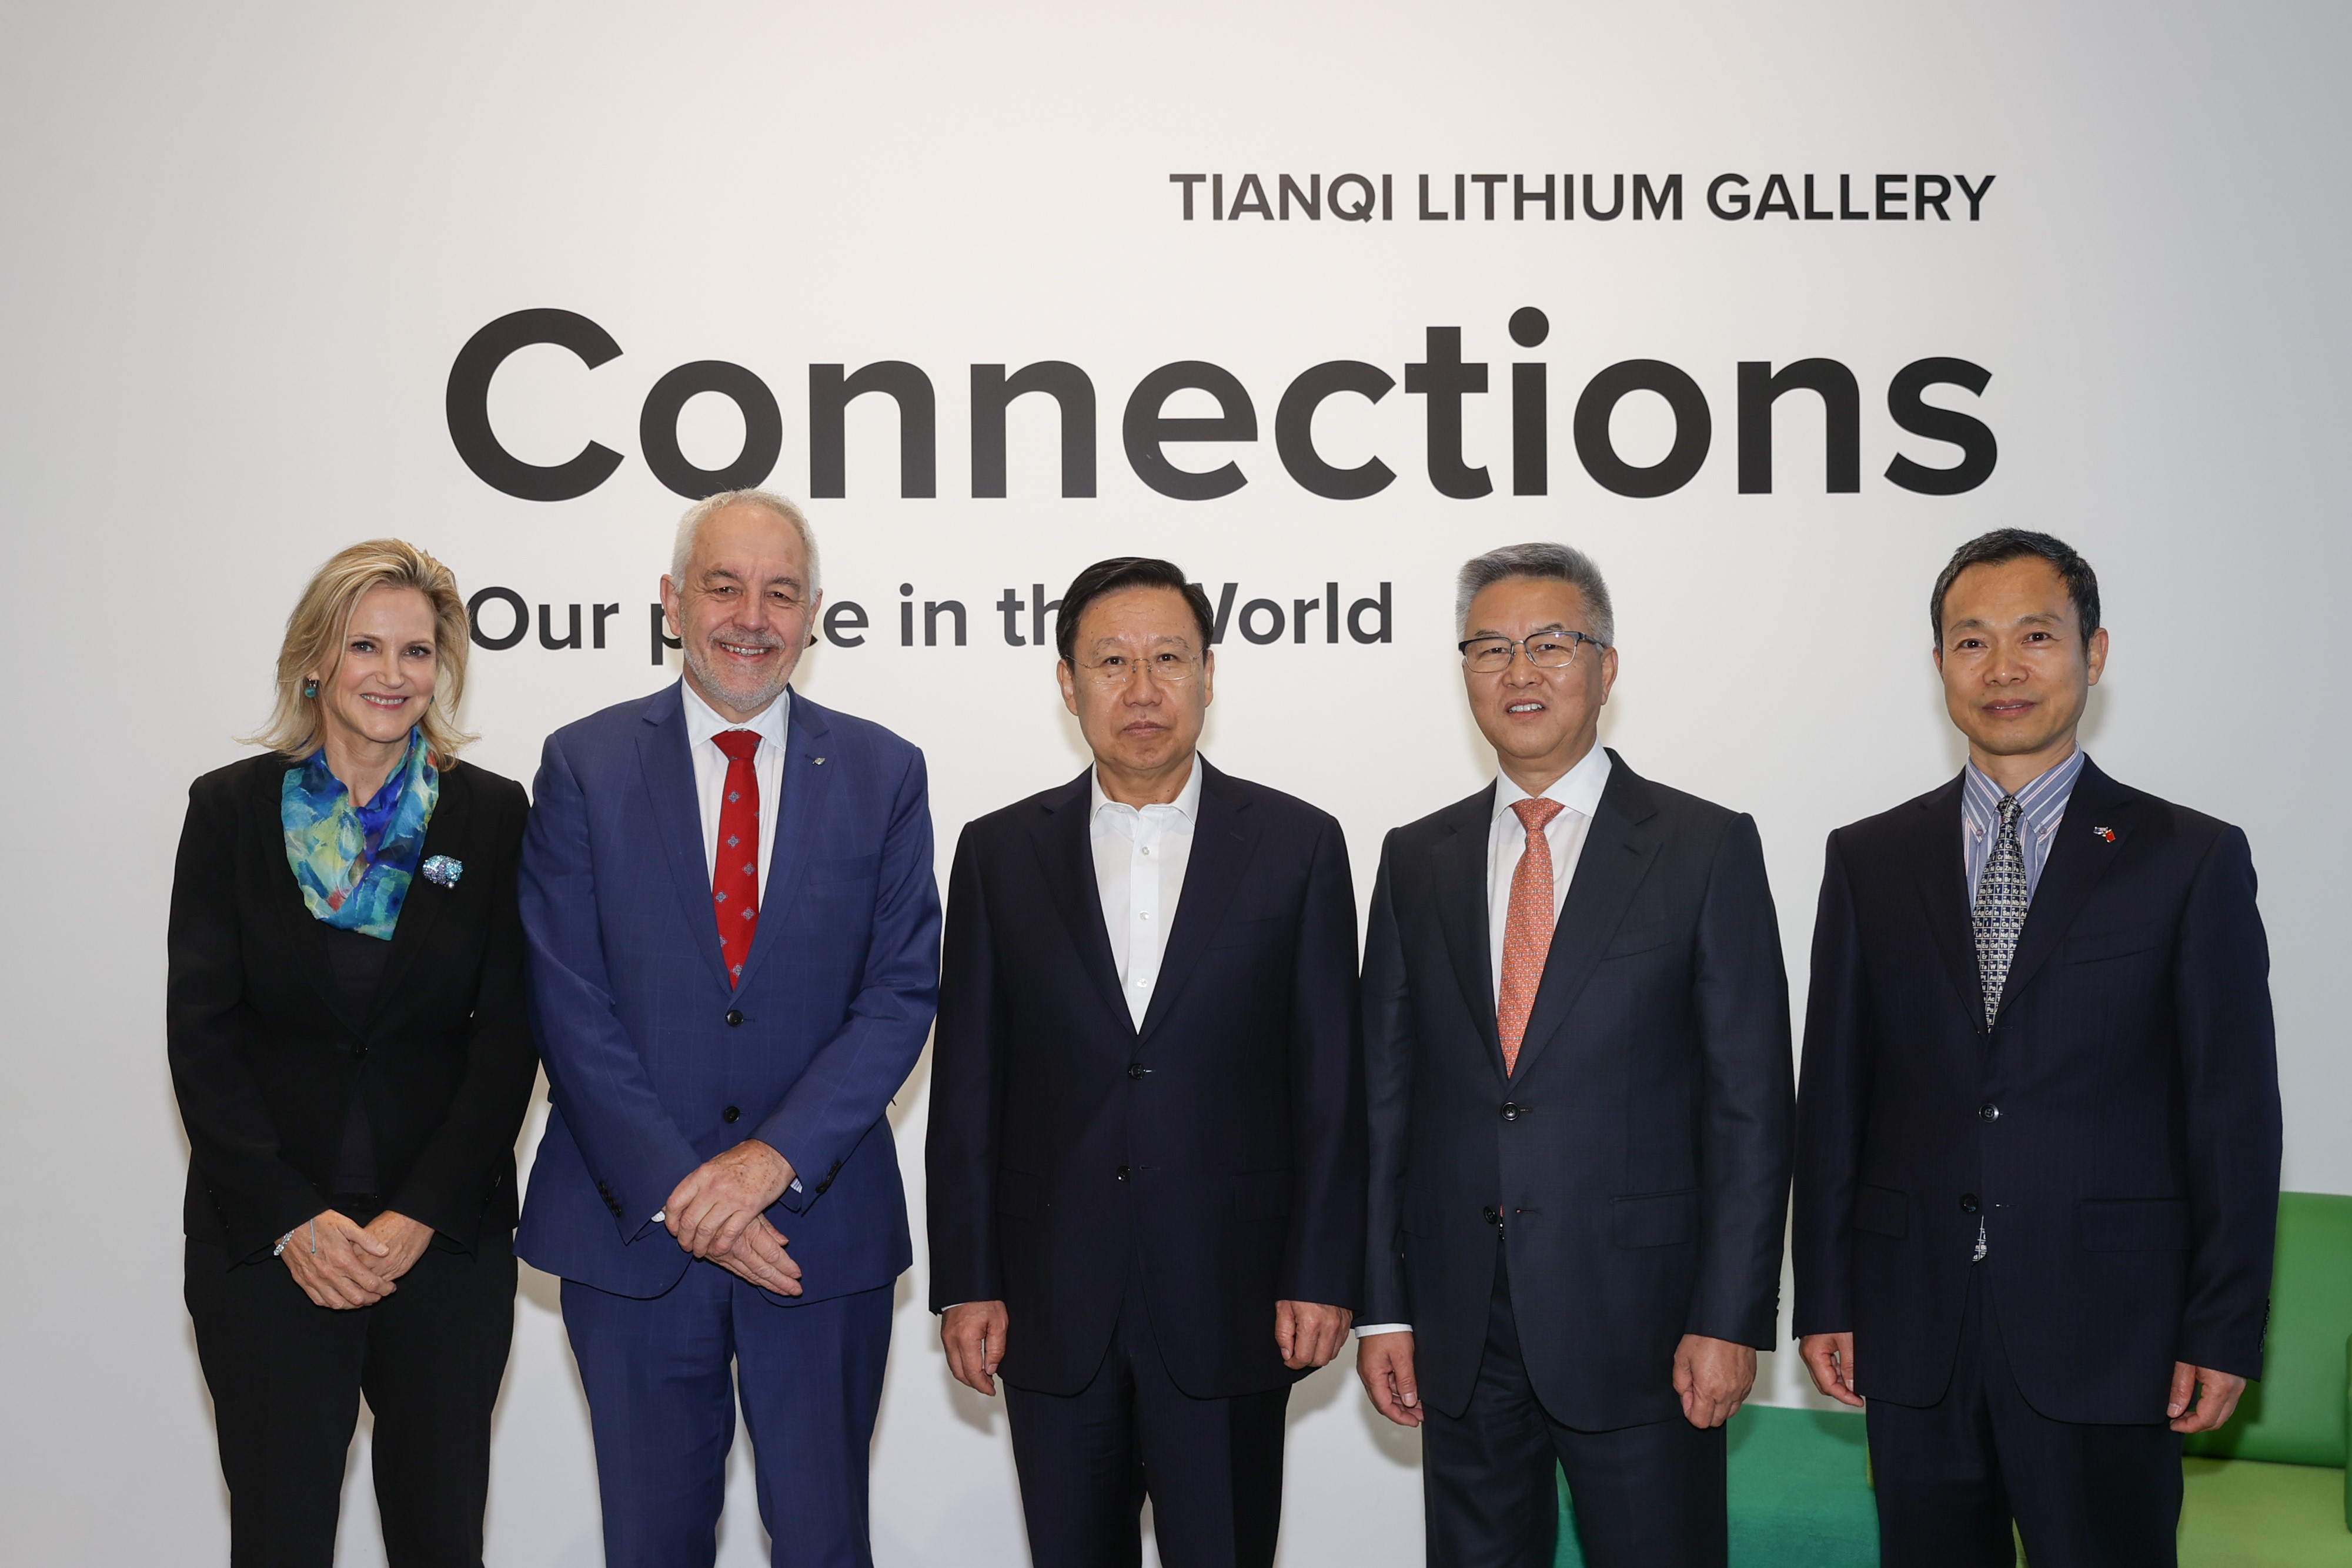 (2)	Sichuan Party Secretary posing with WA Museum CEO, Chair of Board of Trustees, Tianqi Lithium Chairman and Chinese Consul-General outside Tianqi Lithium Connections Gallery 